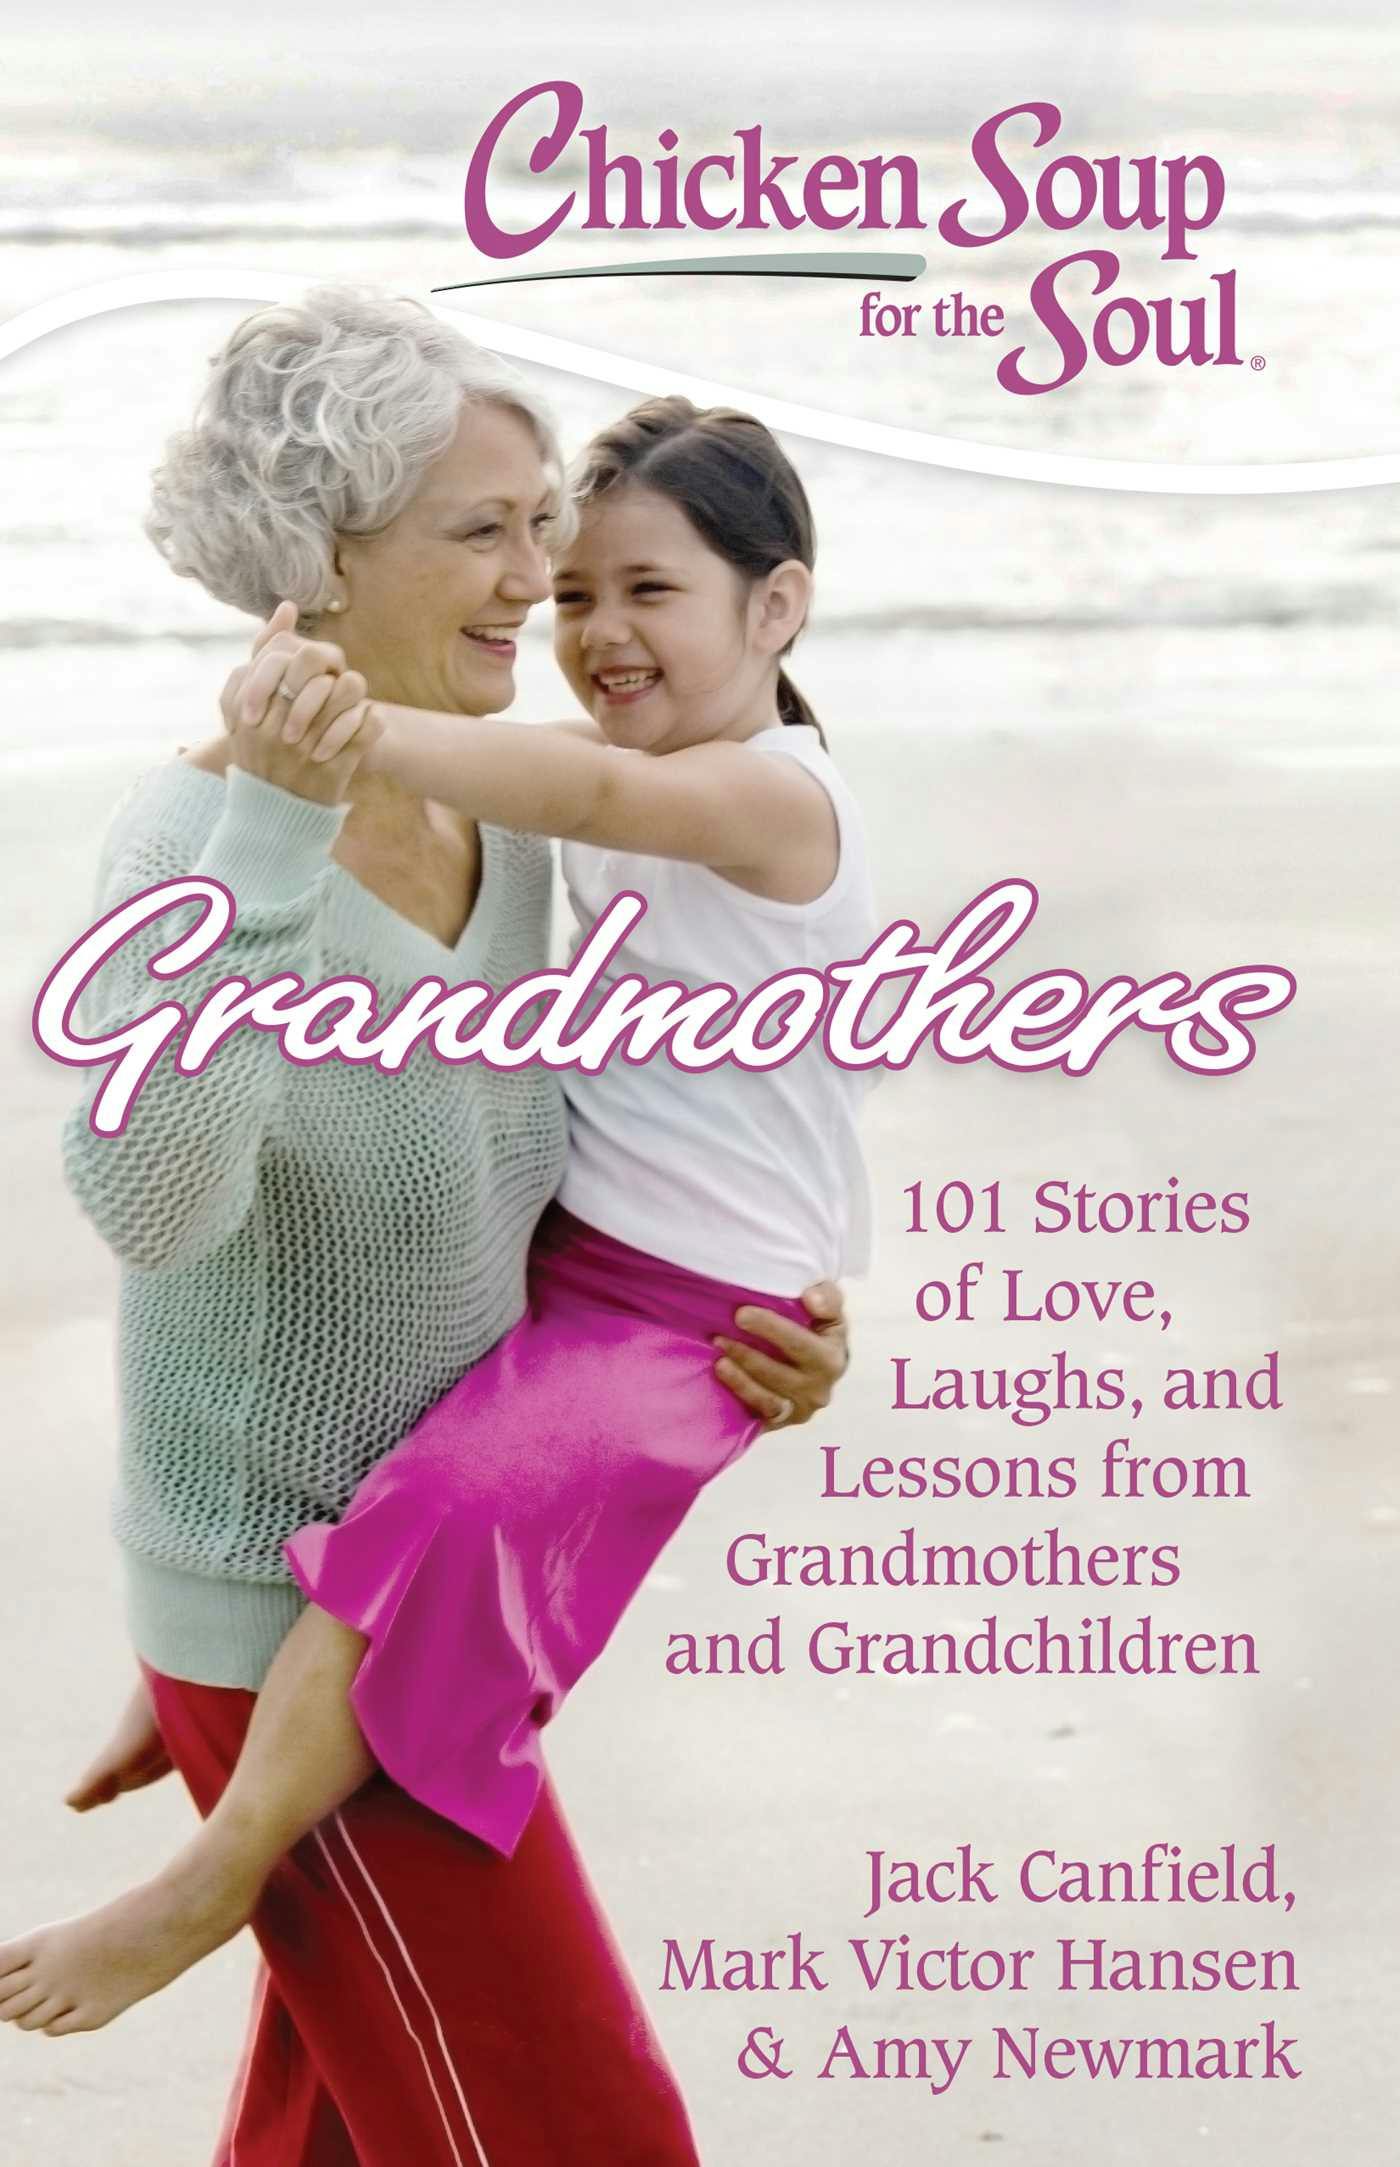 Chicken Soup for the Soul: Grandmothers: 101 Stories of Love, Laughs, and Lessons from Grandmothers and Grandchildren - Mark Victor Hansen, Jack Canfield, Amy Newmark